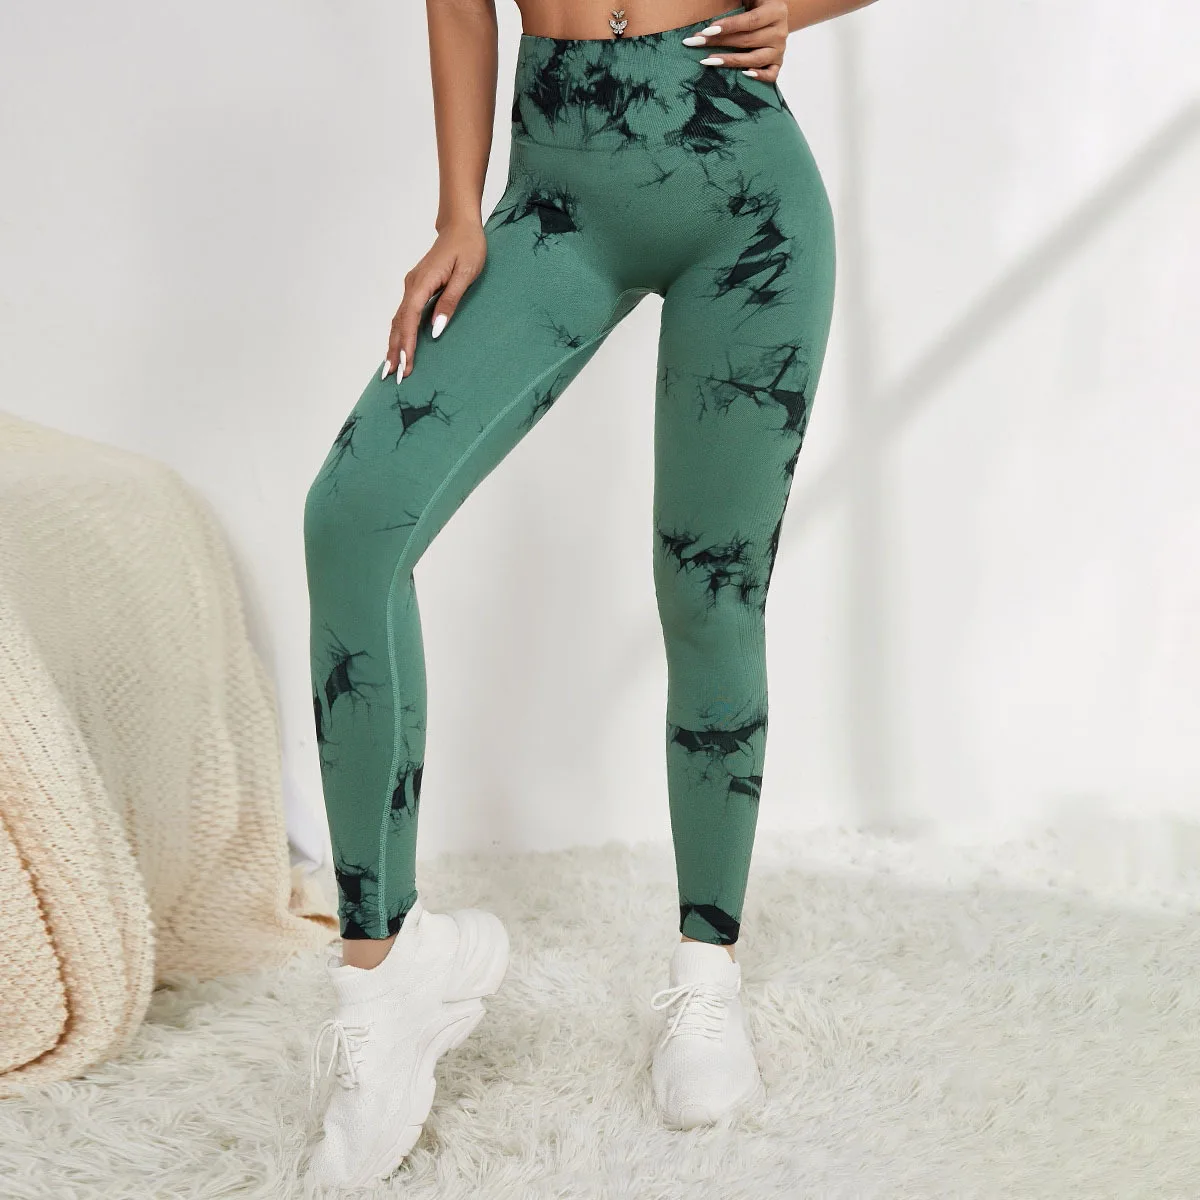  - Seamless Tie Dye Leggings Women For Fitness Yoga Pants Push Up Workout Sports Legging High Waist Tights Gym Ladies Clothing